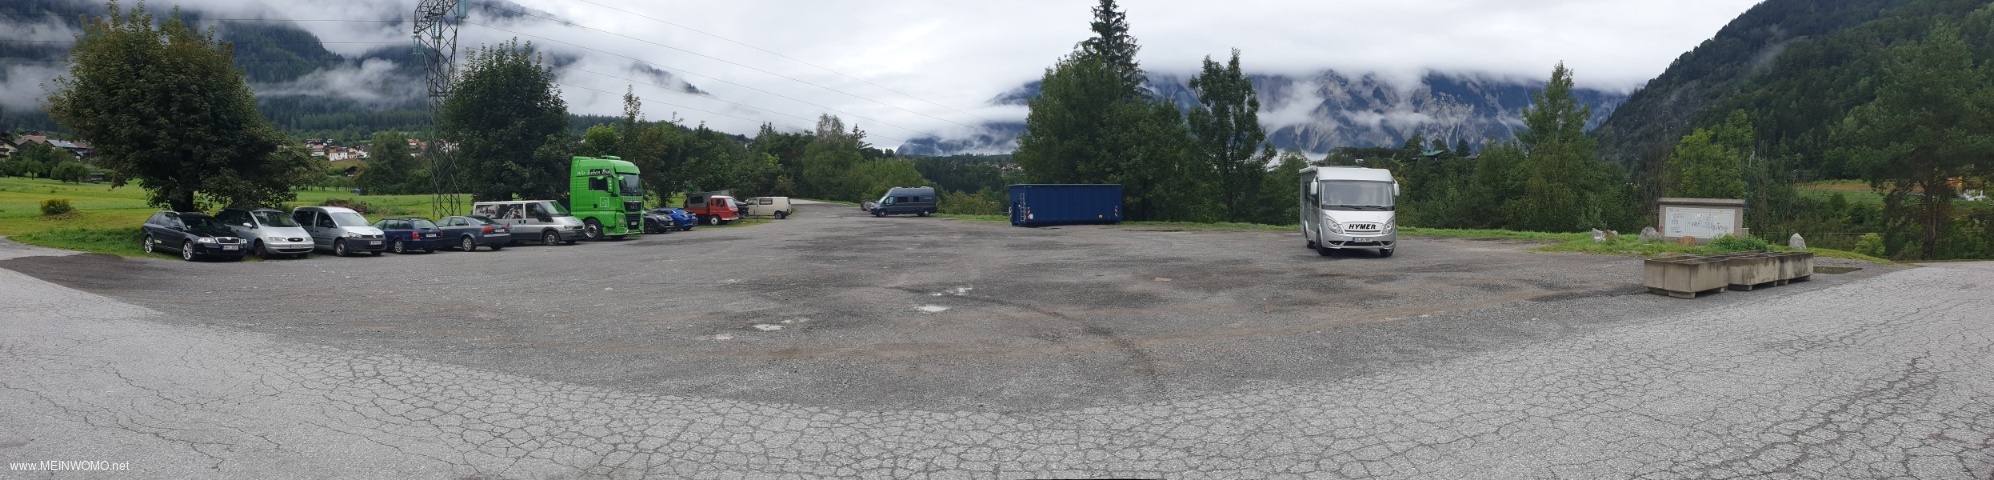 Parking at the end of August 2020